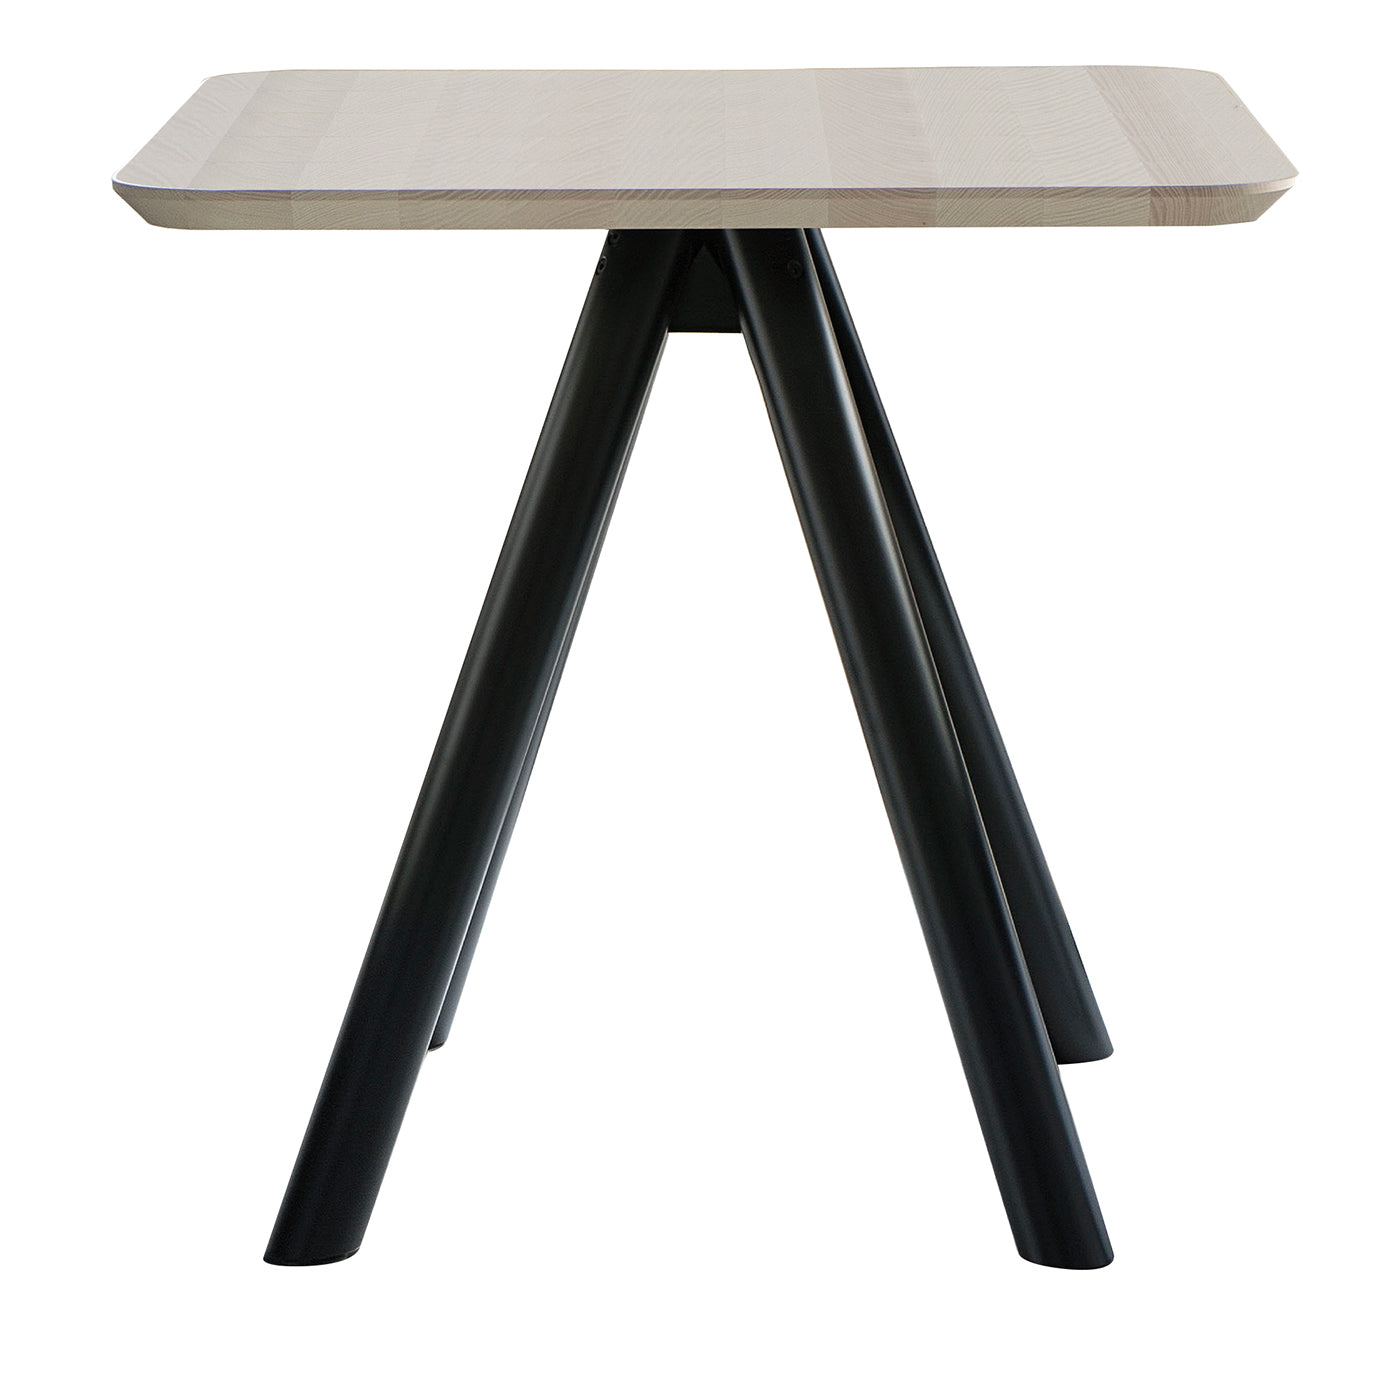 Aky Contract 4 Wood Bistrò Table - Hauptansicht